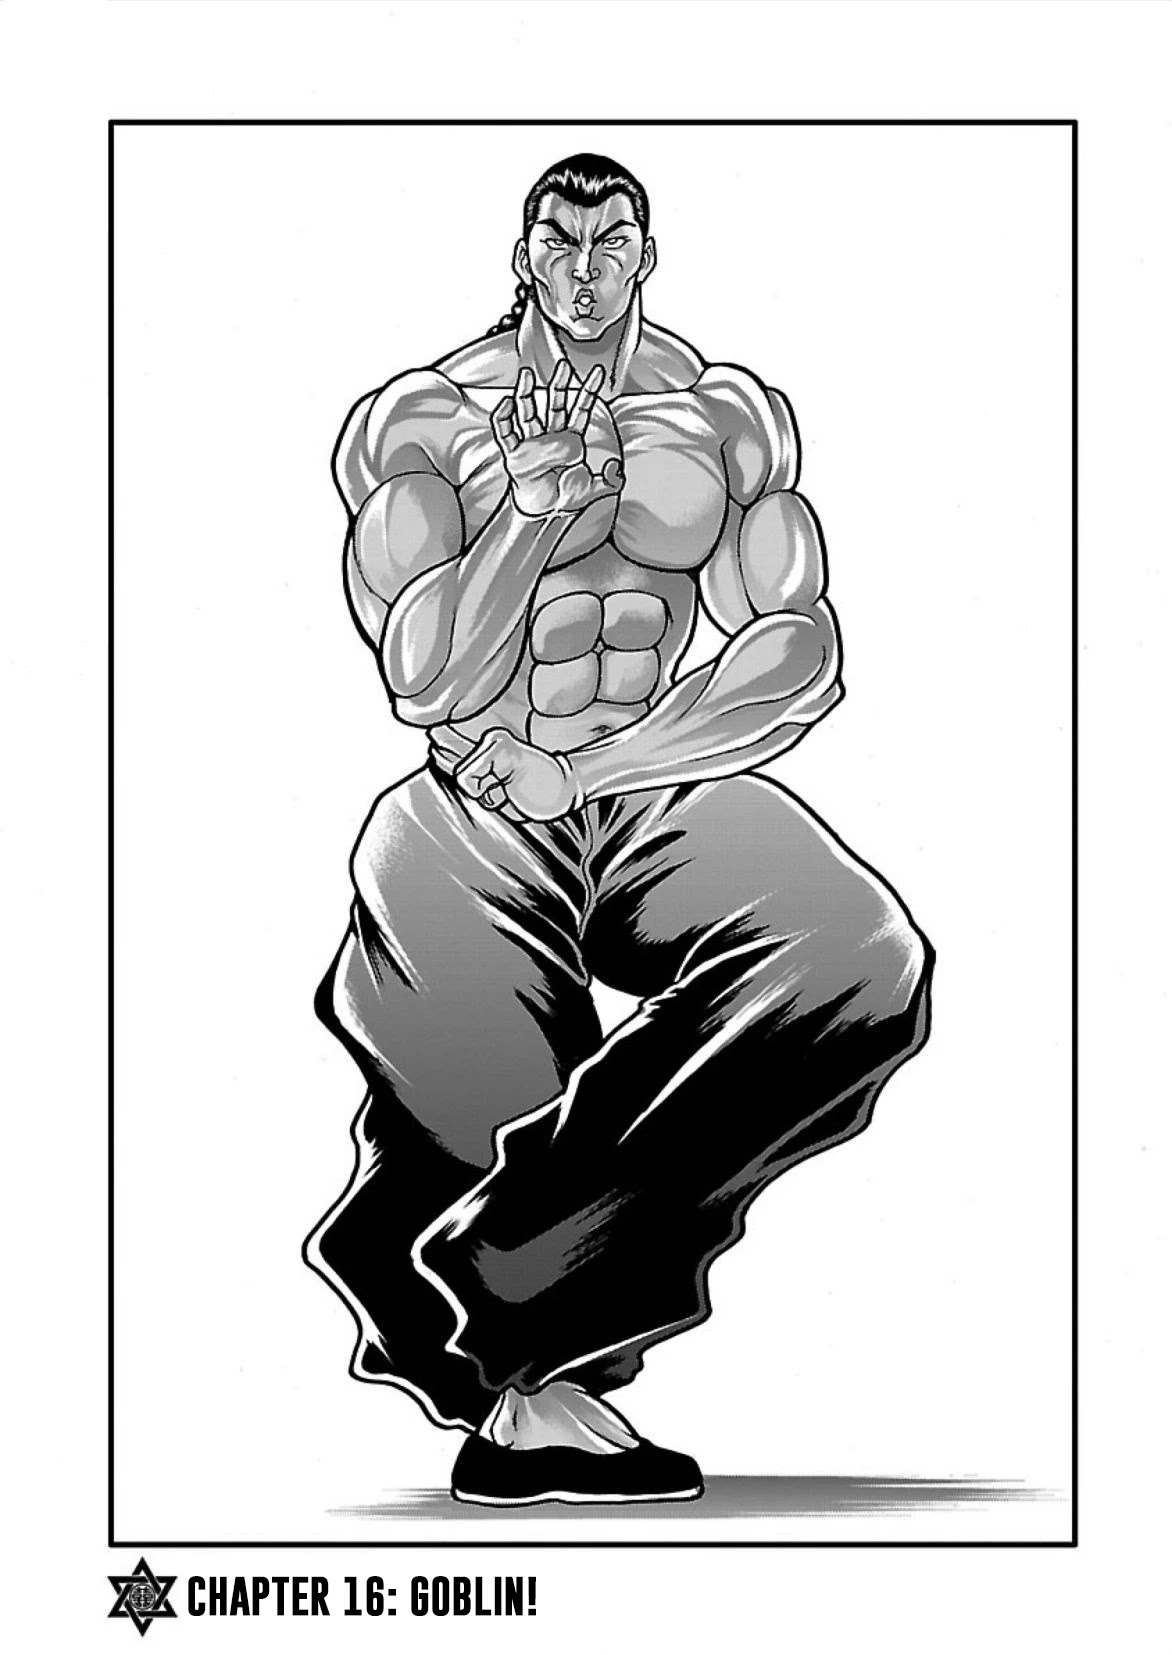 Baki Side Story - Retsu Kaioh Doesn't Mind Even If It's In Another World - chapter 16 - #1